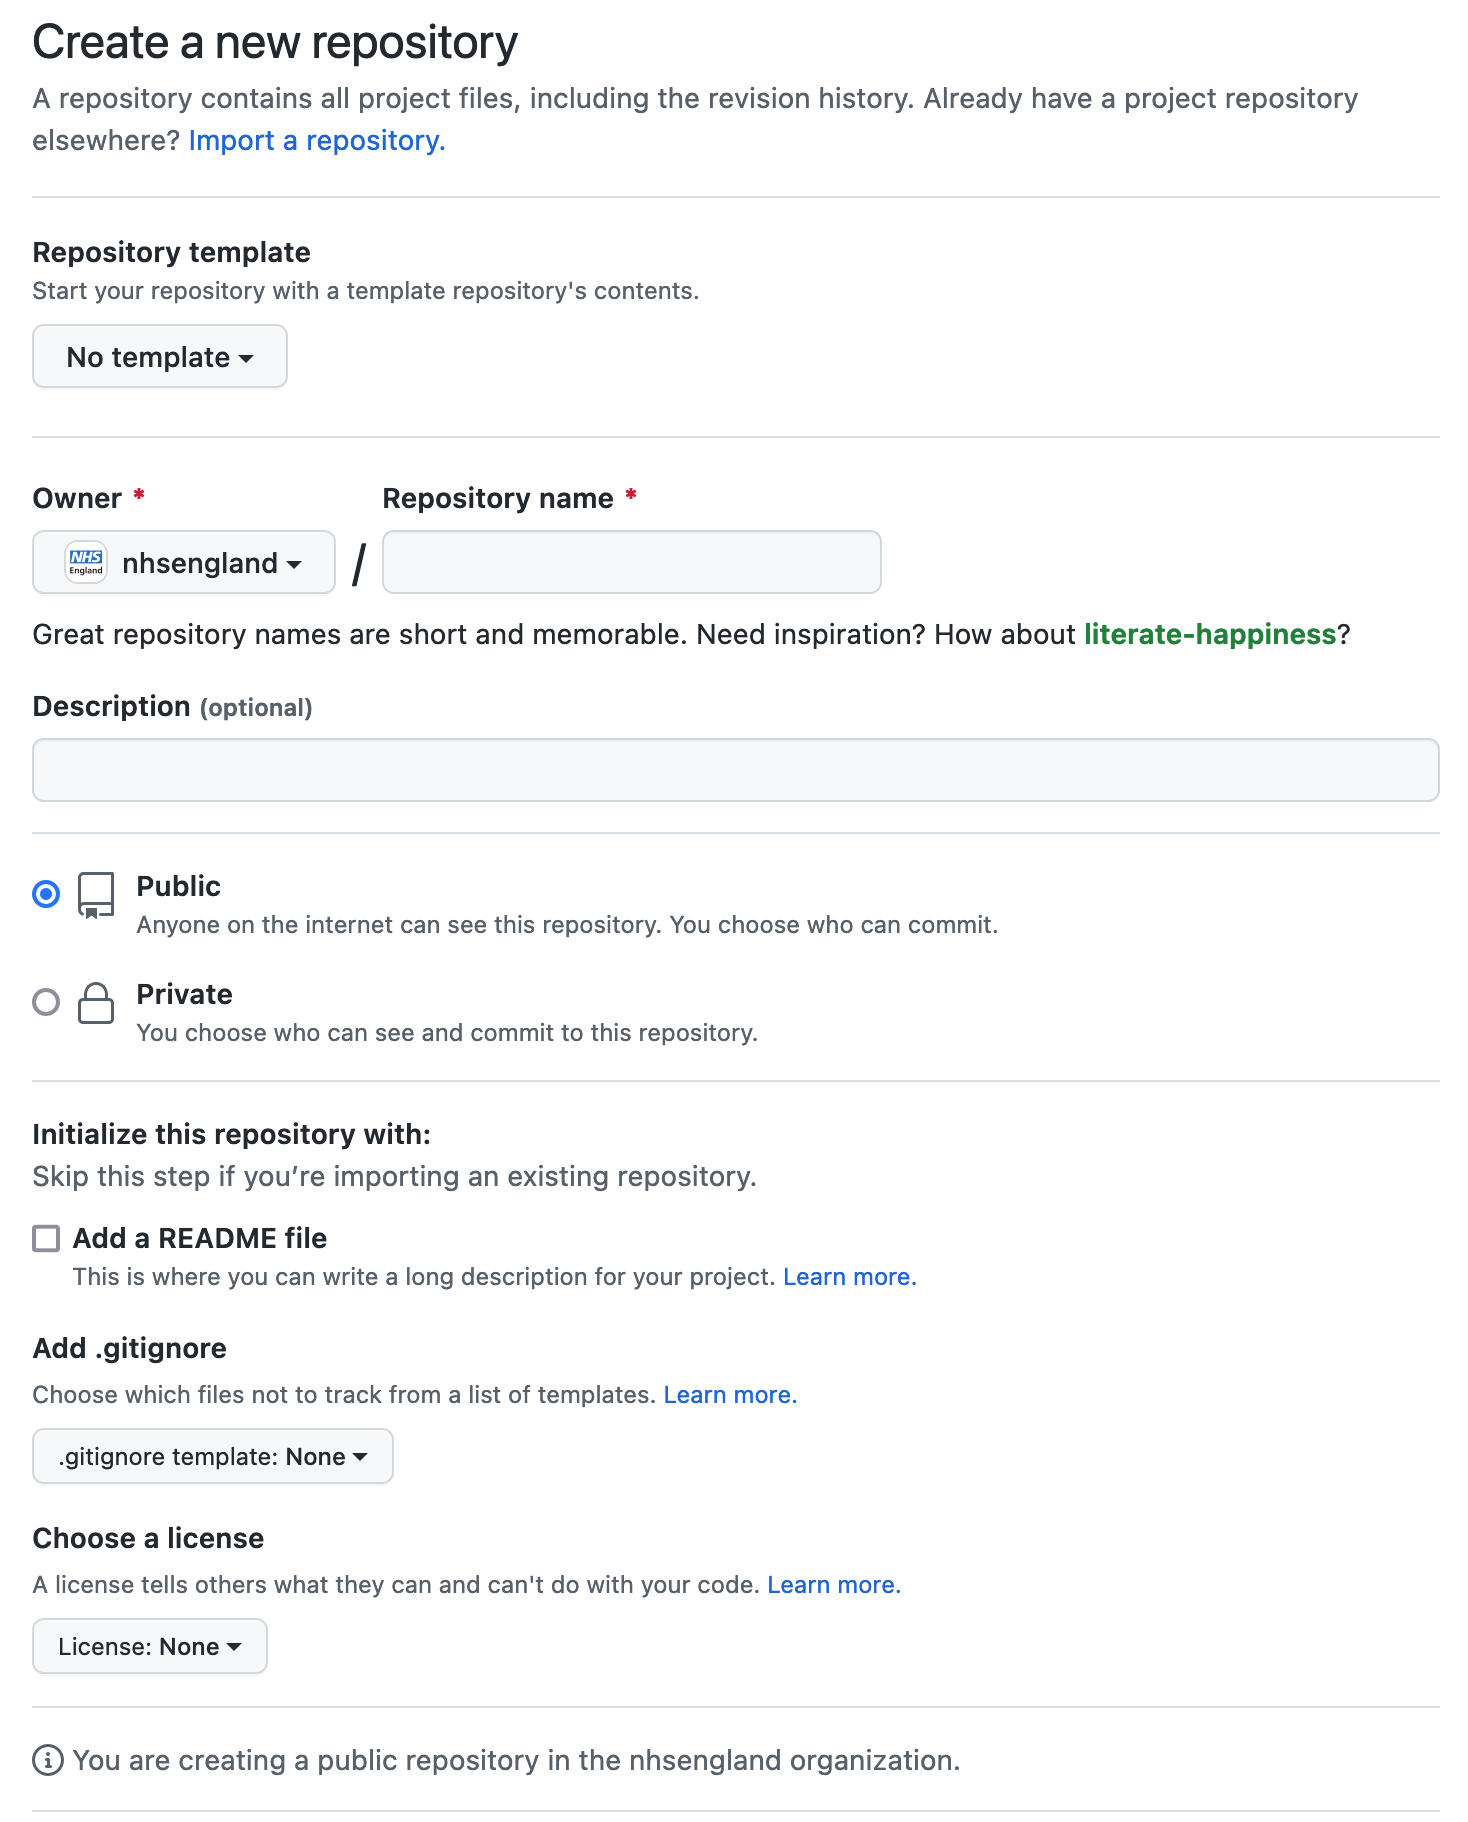 Screenshot of the 'Create a new repository' page on GitHub